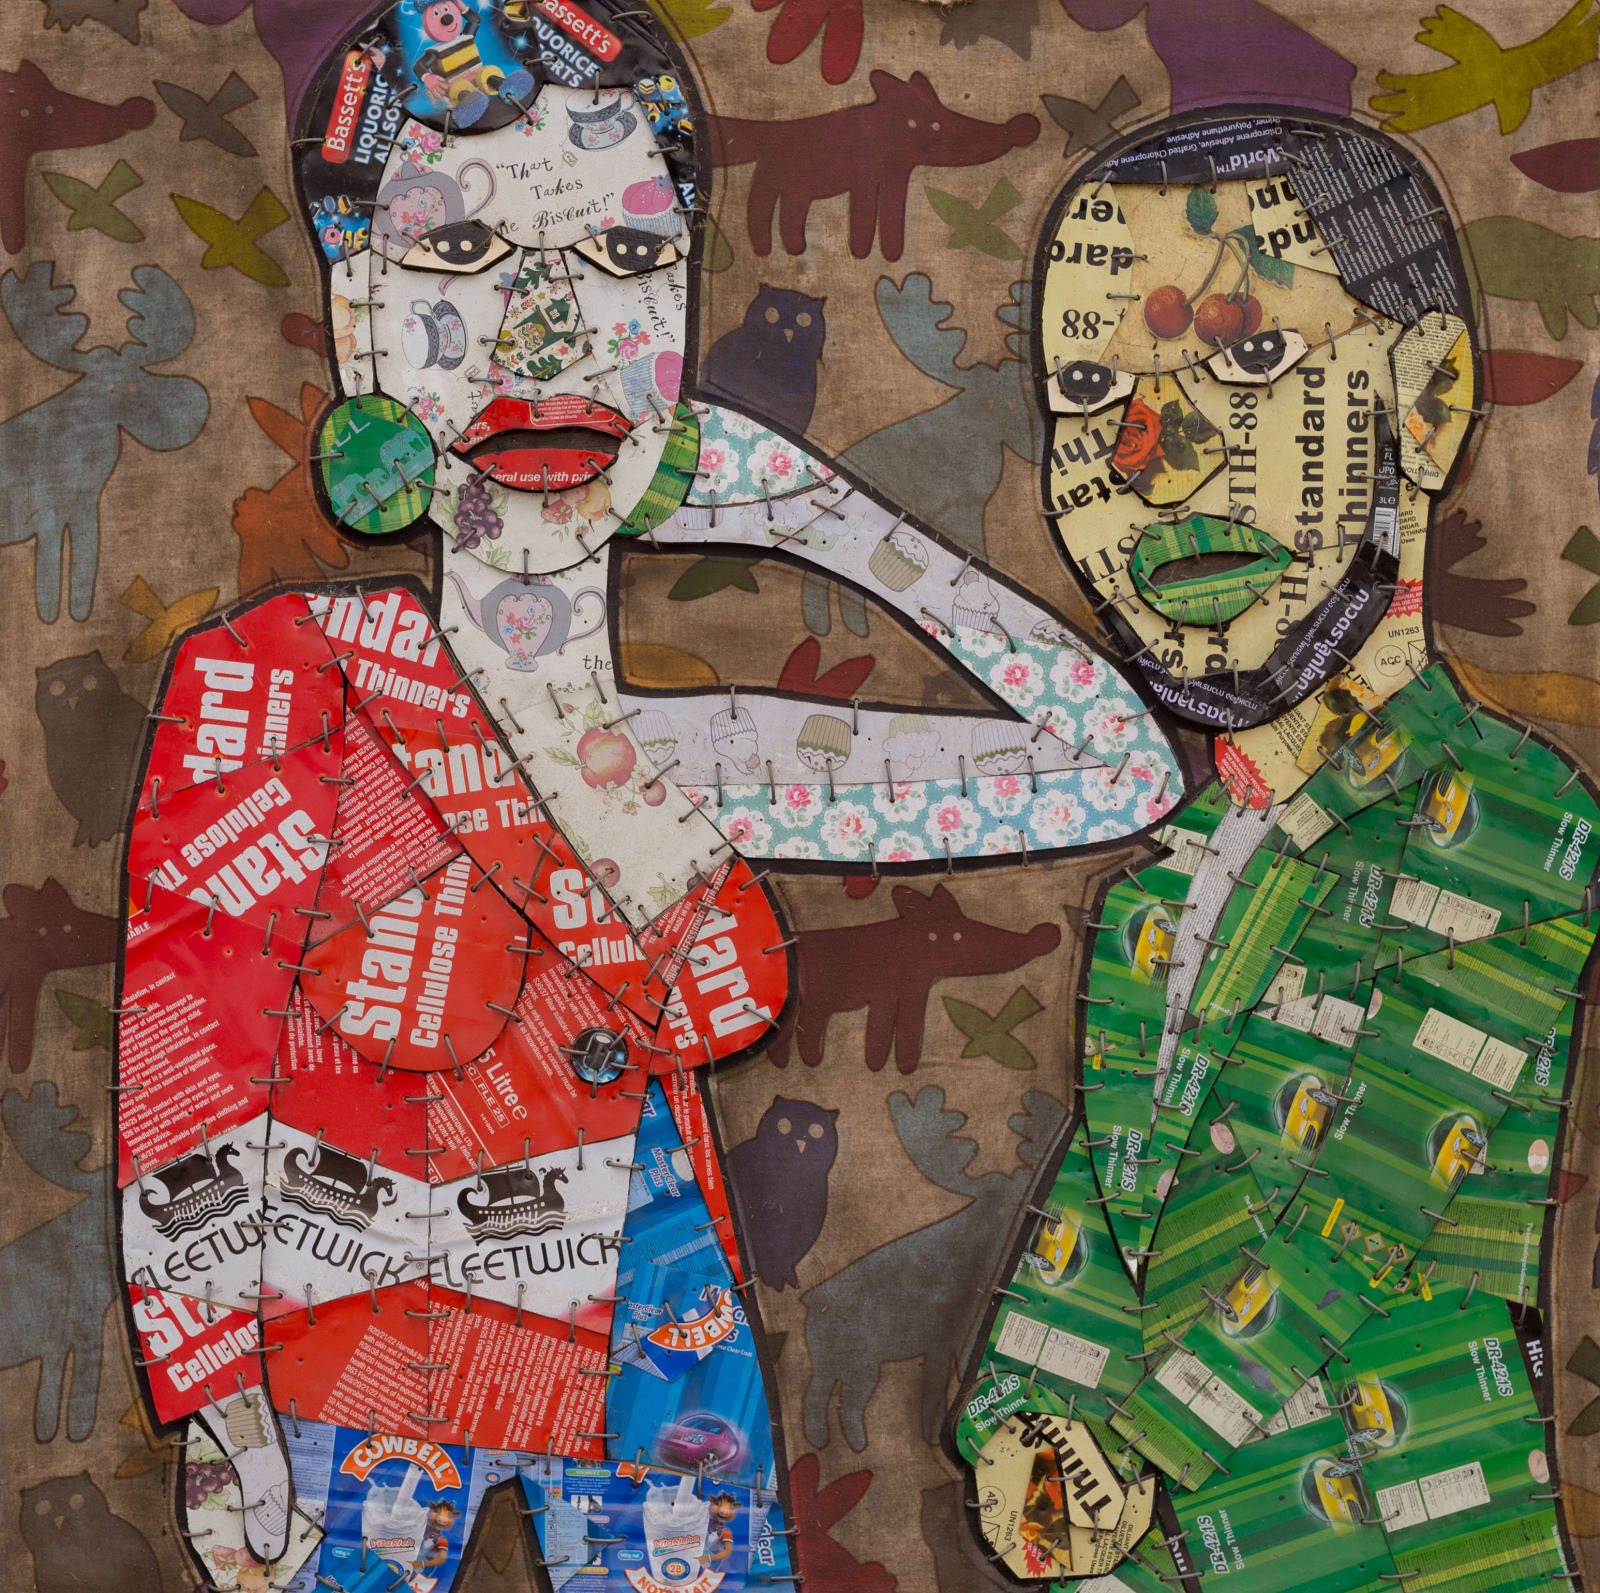 Tete Azankpo Le Couple Elegant 120 cm X 120 cm Wood, painted canvas, enameled metal and wire USD 9000.00